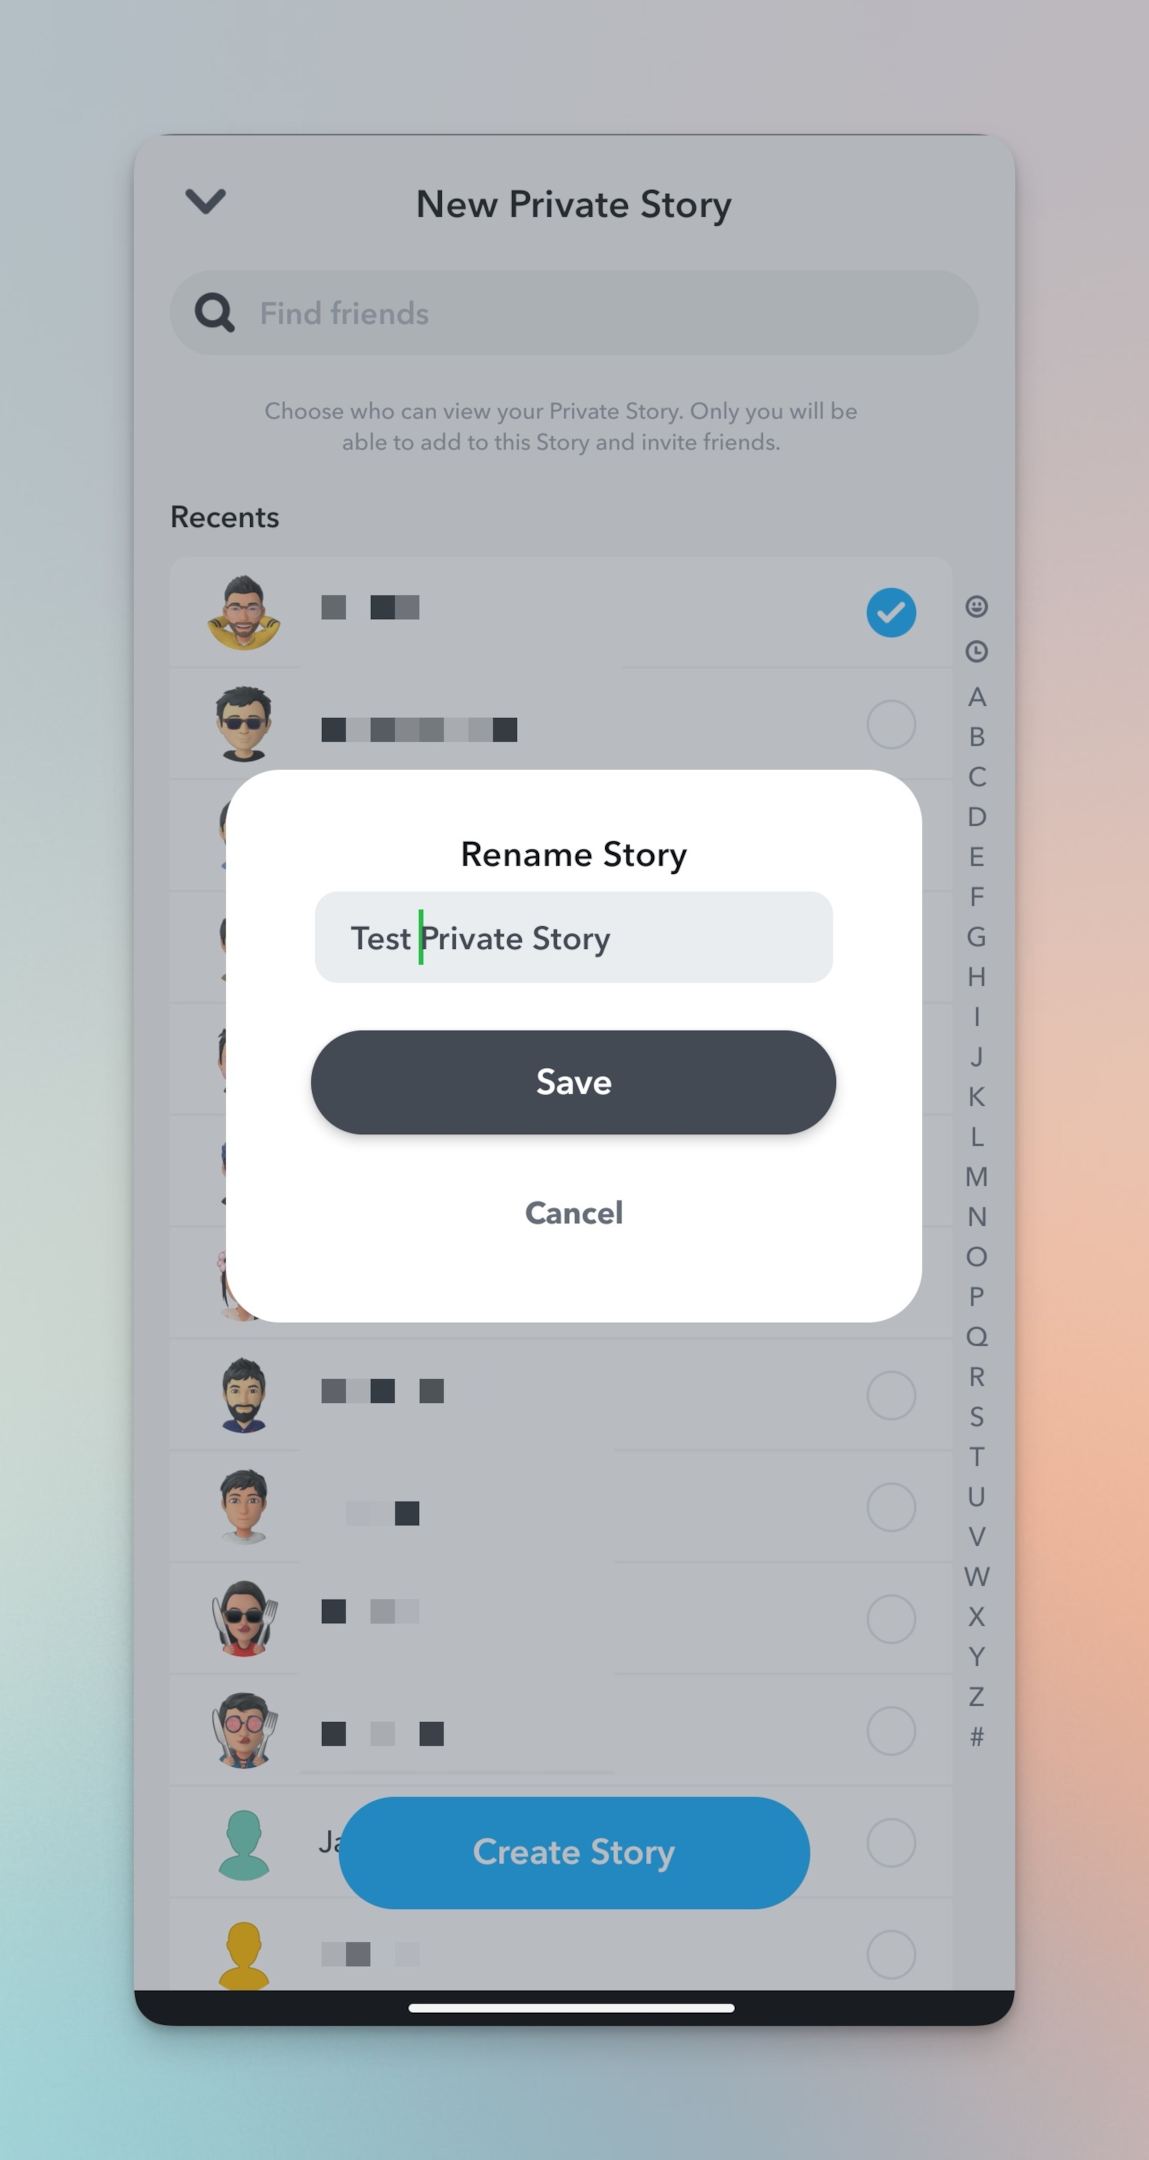 Remote.tools shows how to rename a private story. Tap rename story to rename story multiple times.